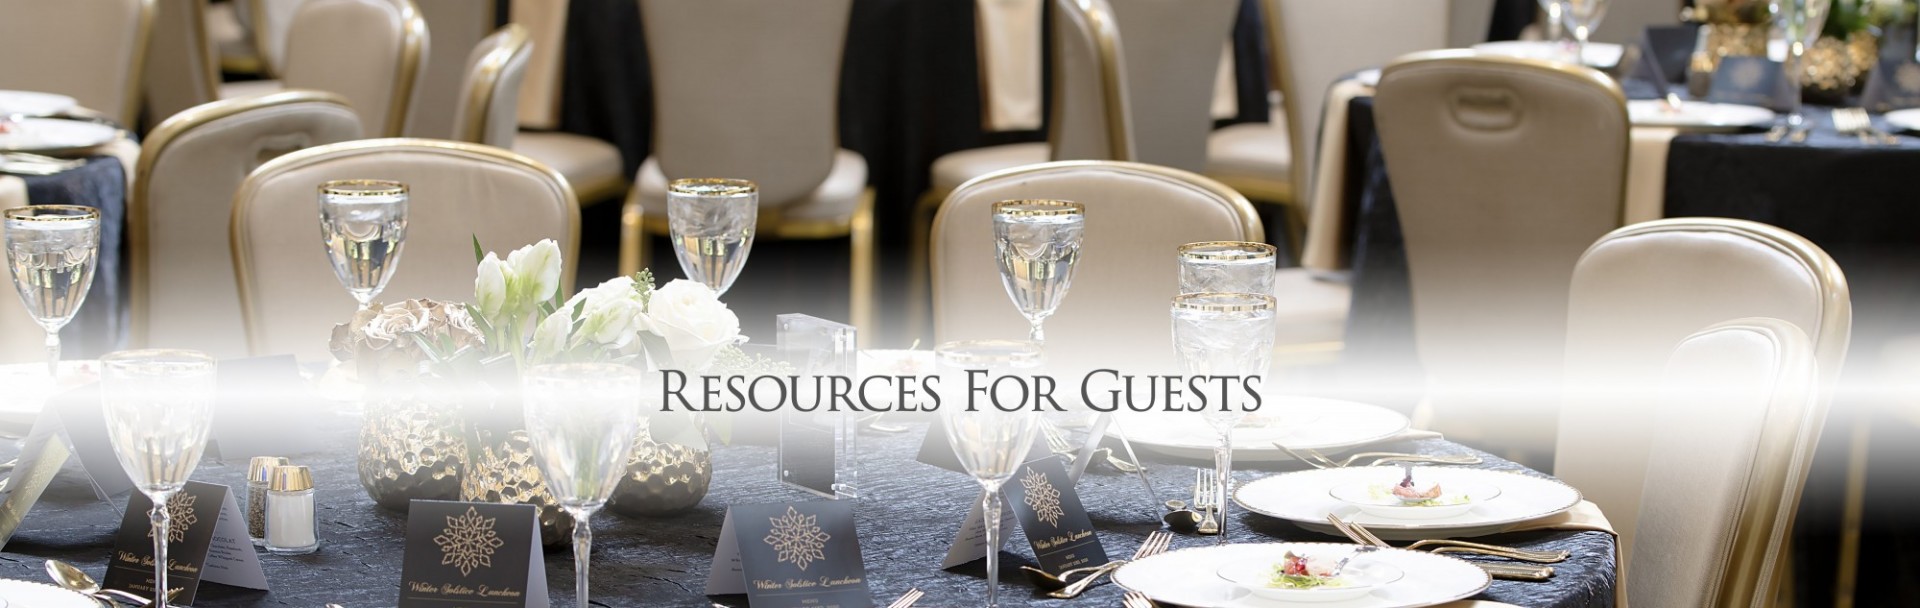 Resoures for Guests